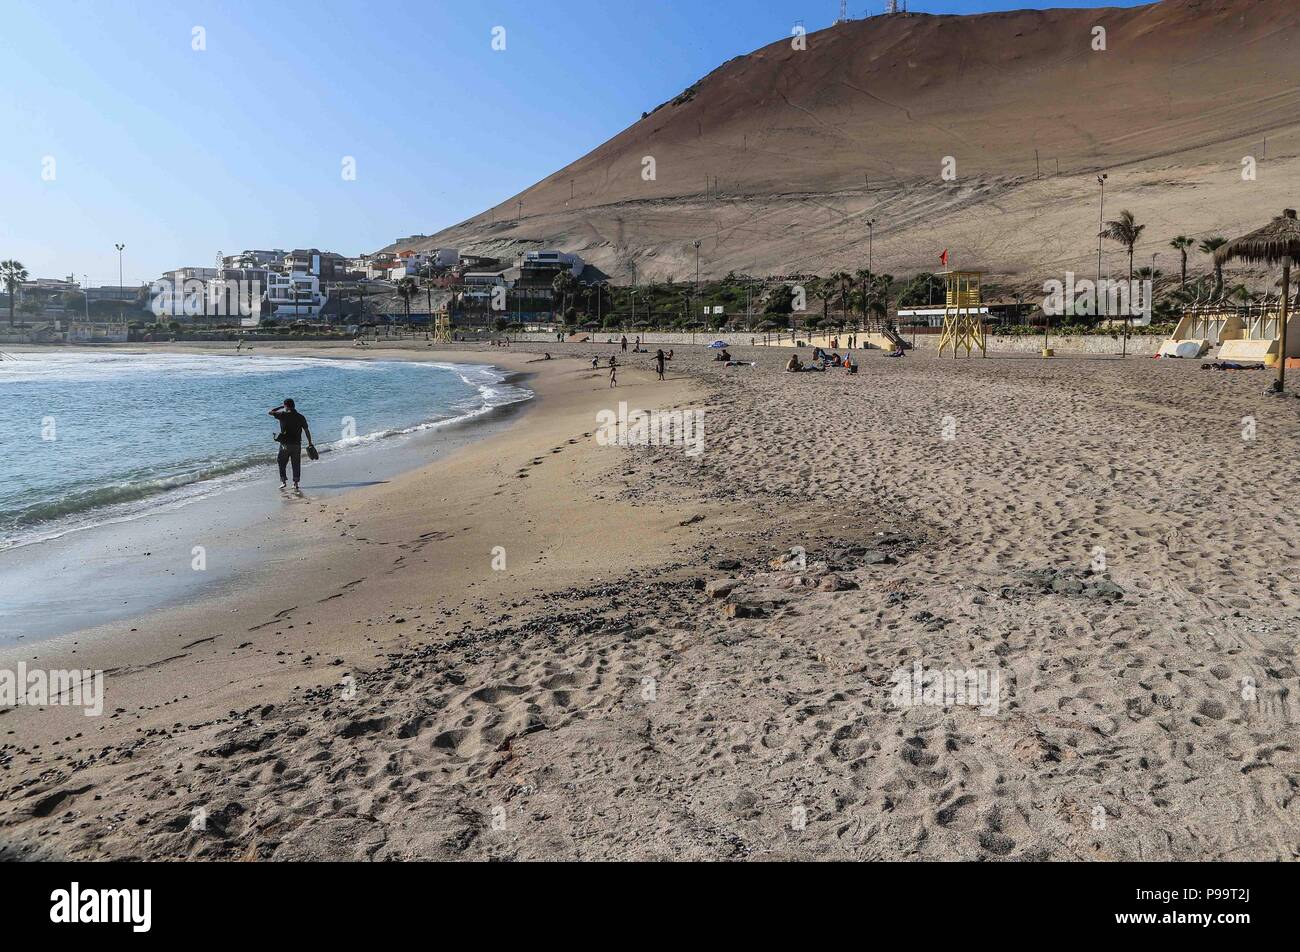 Beach of Arica Chile. Morro de Arica, Chile. Arica is a port city in northern Chile known for its ideal beaches for surfing. Stock Photo